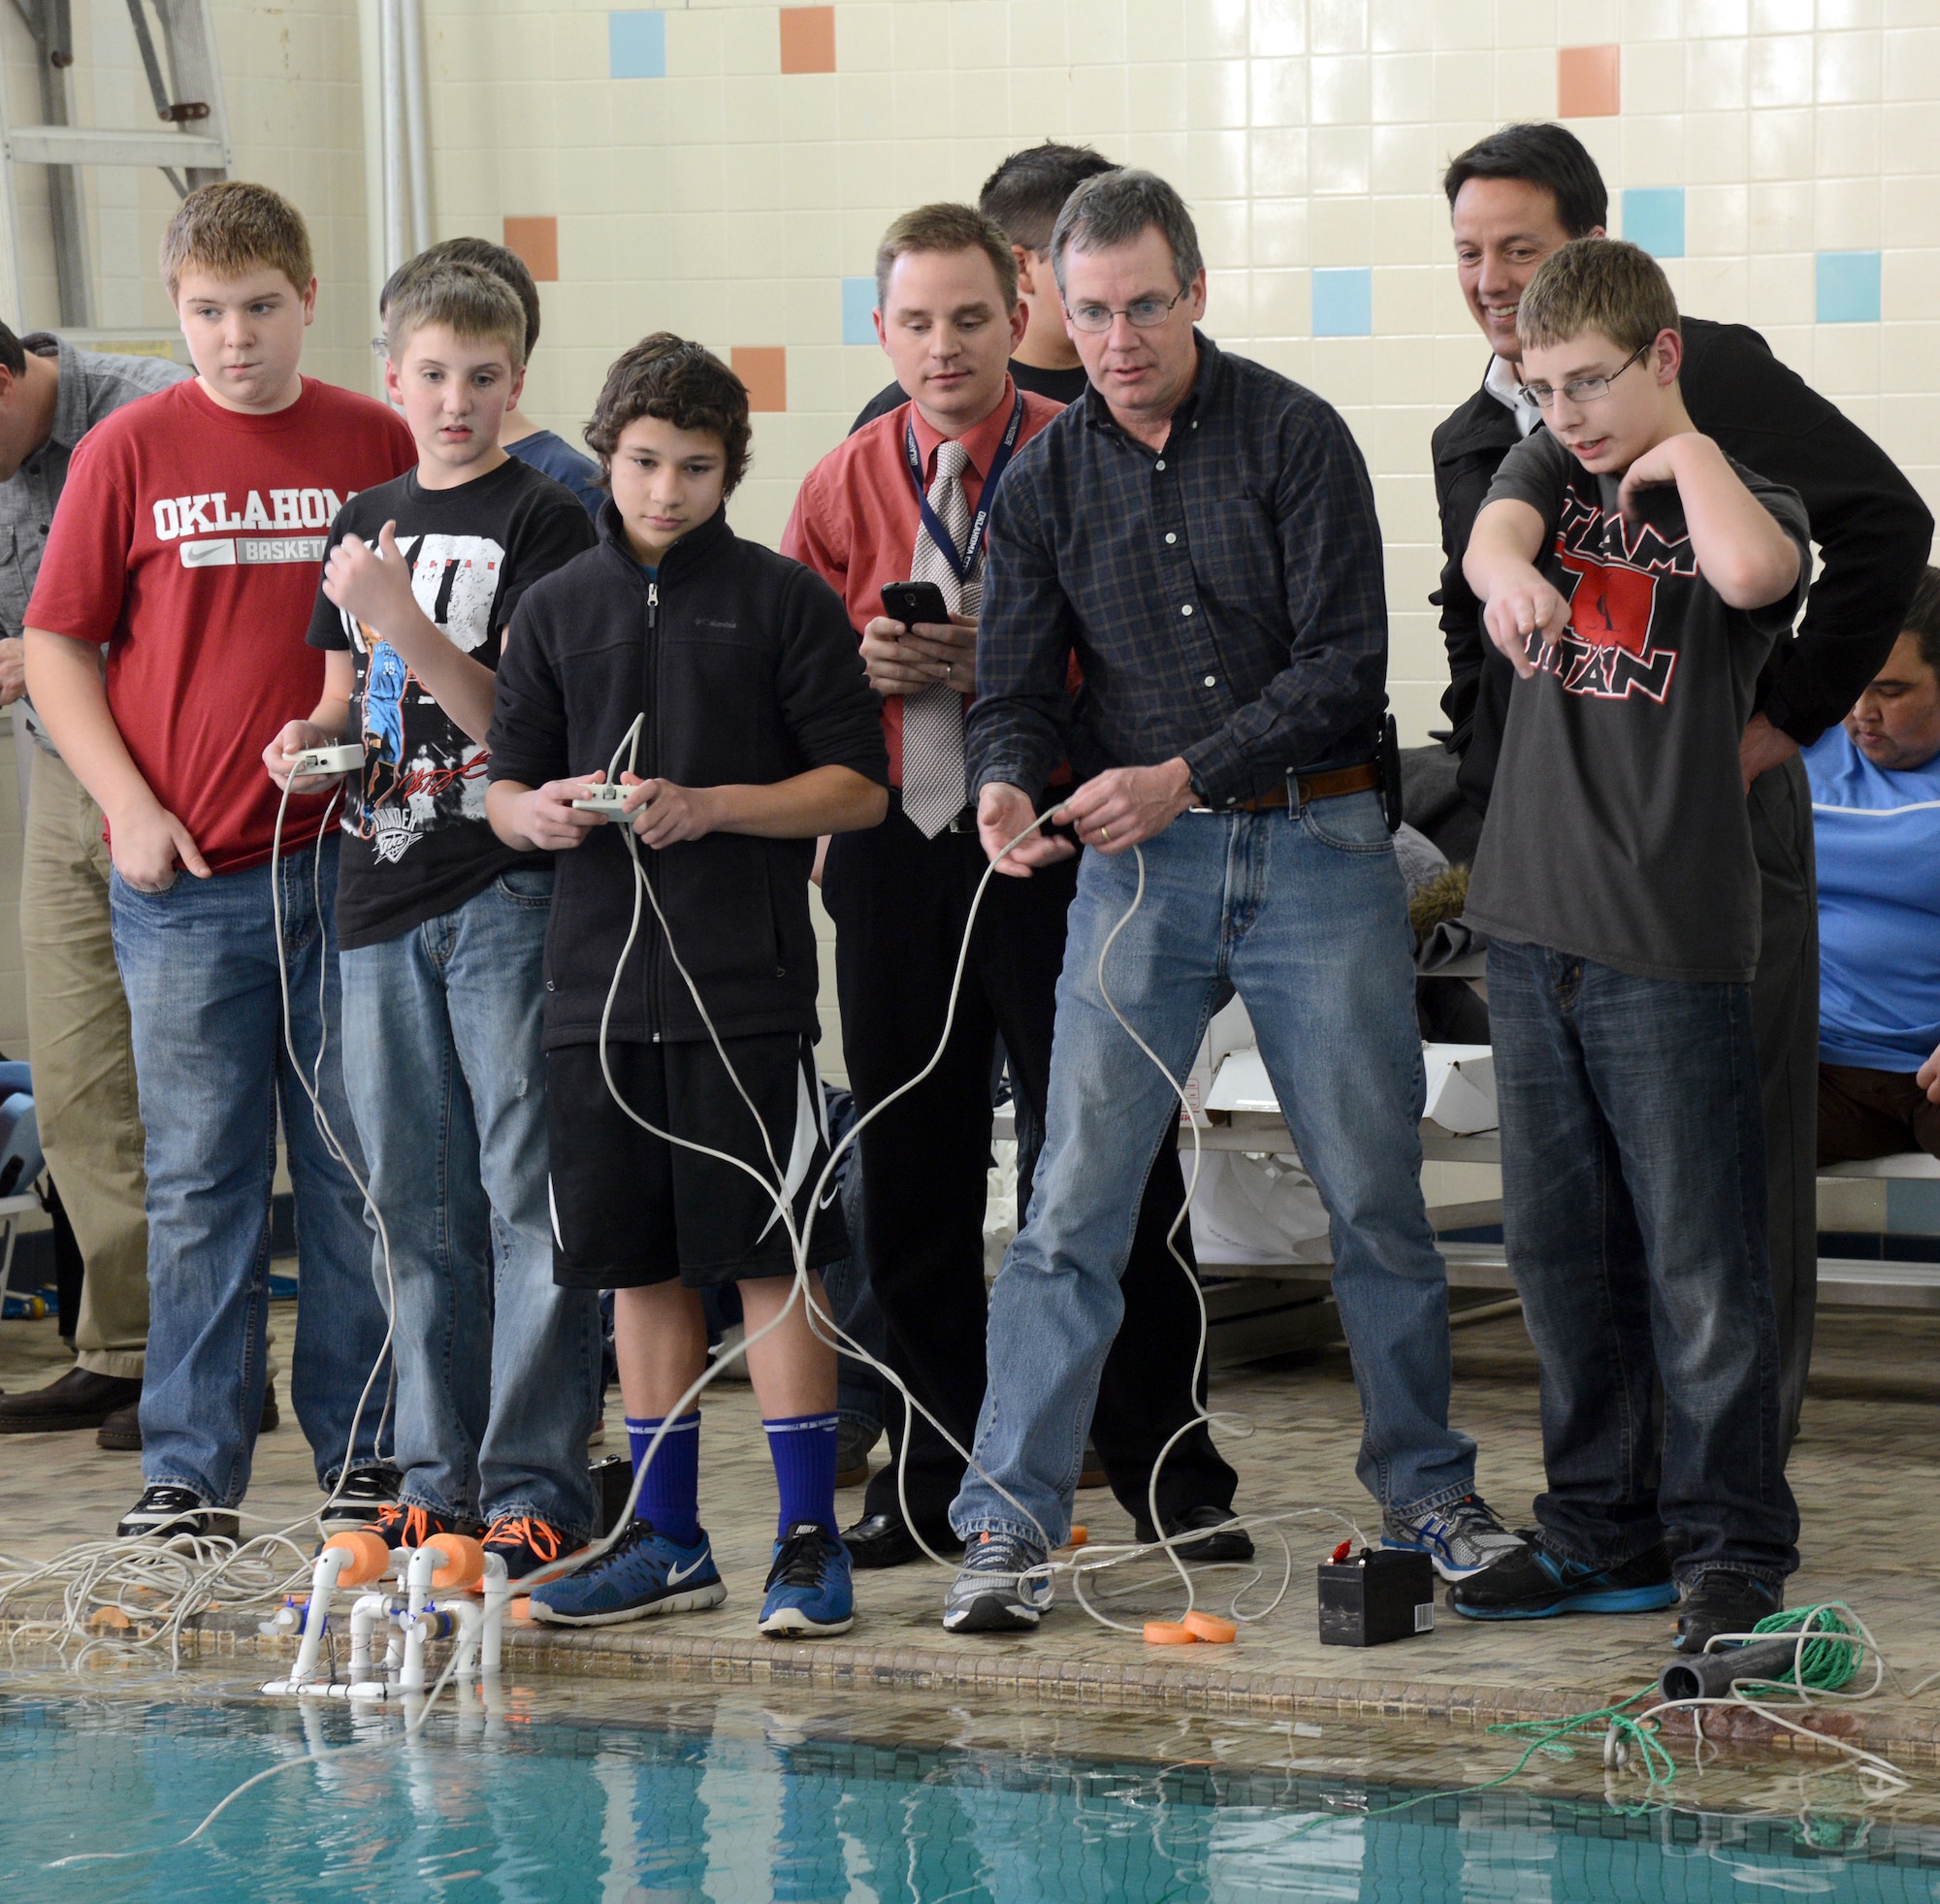 With the help of their Tinker mentors, Carl Albert Middle School students Matt Salsbury, Gregory Aldridge, Roshan Abhayagoonawardhana and Jakob Carlson, from left, work together to maneuver their SeaPerch Remotely Operated Vehicle through obstacles set up in the Midwest City YMCA pool last week. Watching the students are Don Arrowood, B-52 Program Office; Rich Desmond, 555th Software Maintenance Group; and Jeff Catron, Air Force Sustainment Center Engineering Directorate. (Air Force photo by Micah Garbarino)